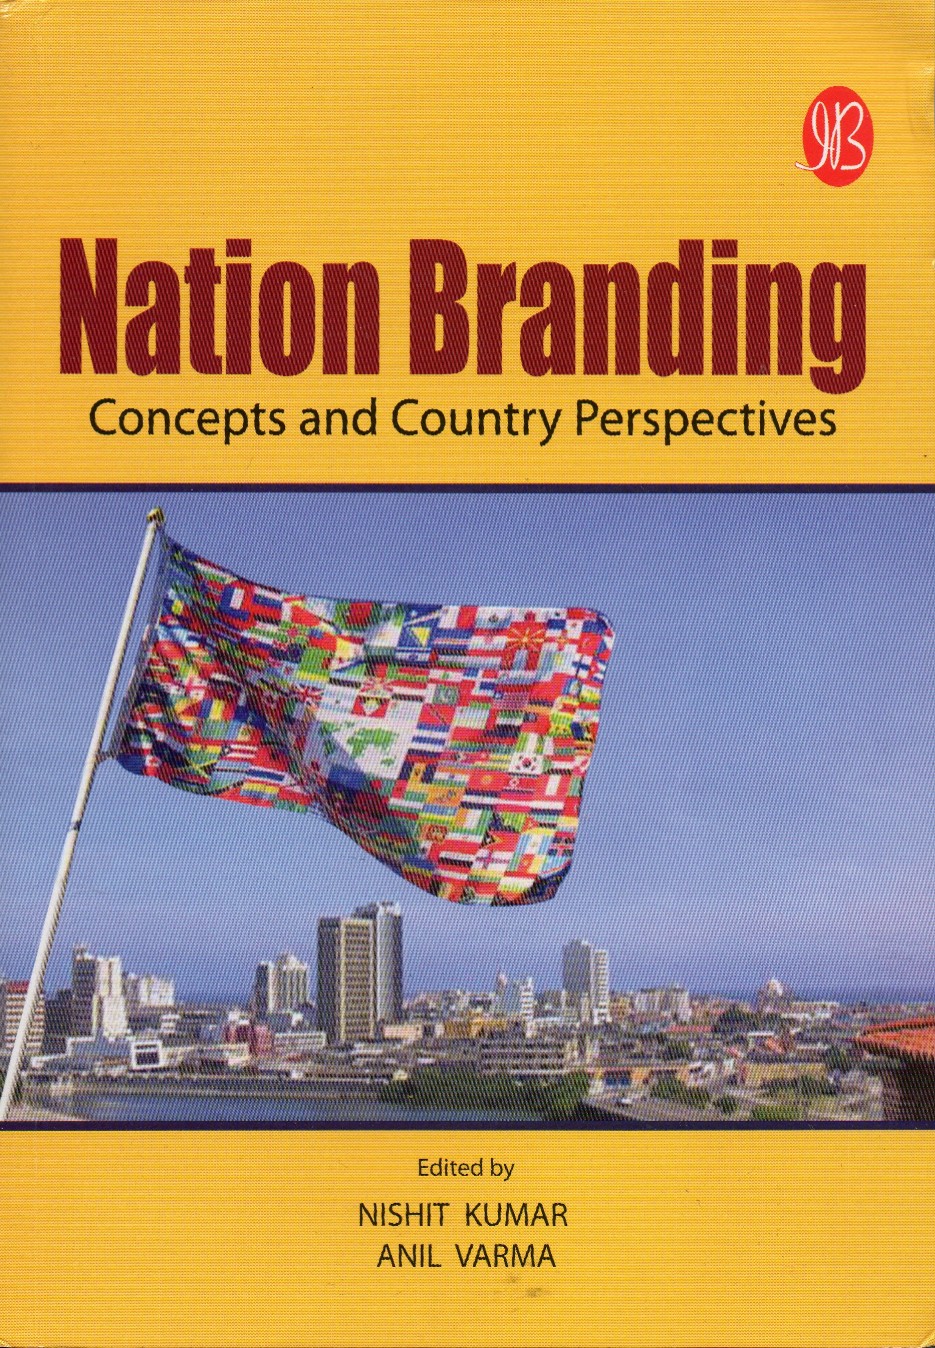 Nation Branding - Concepts and Country Perspectives